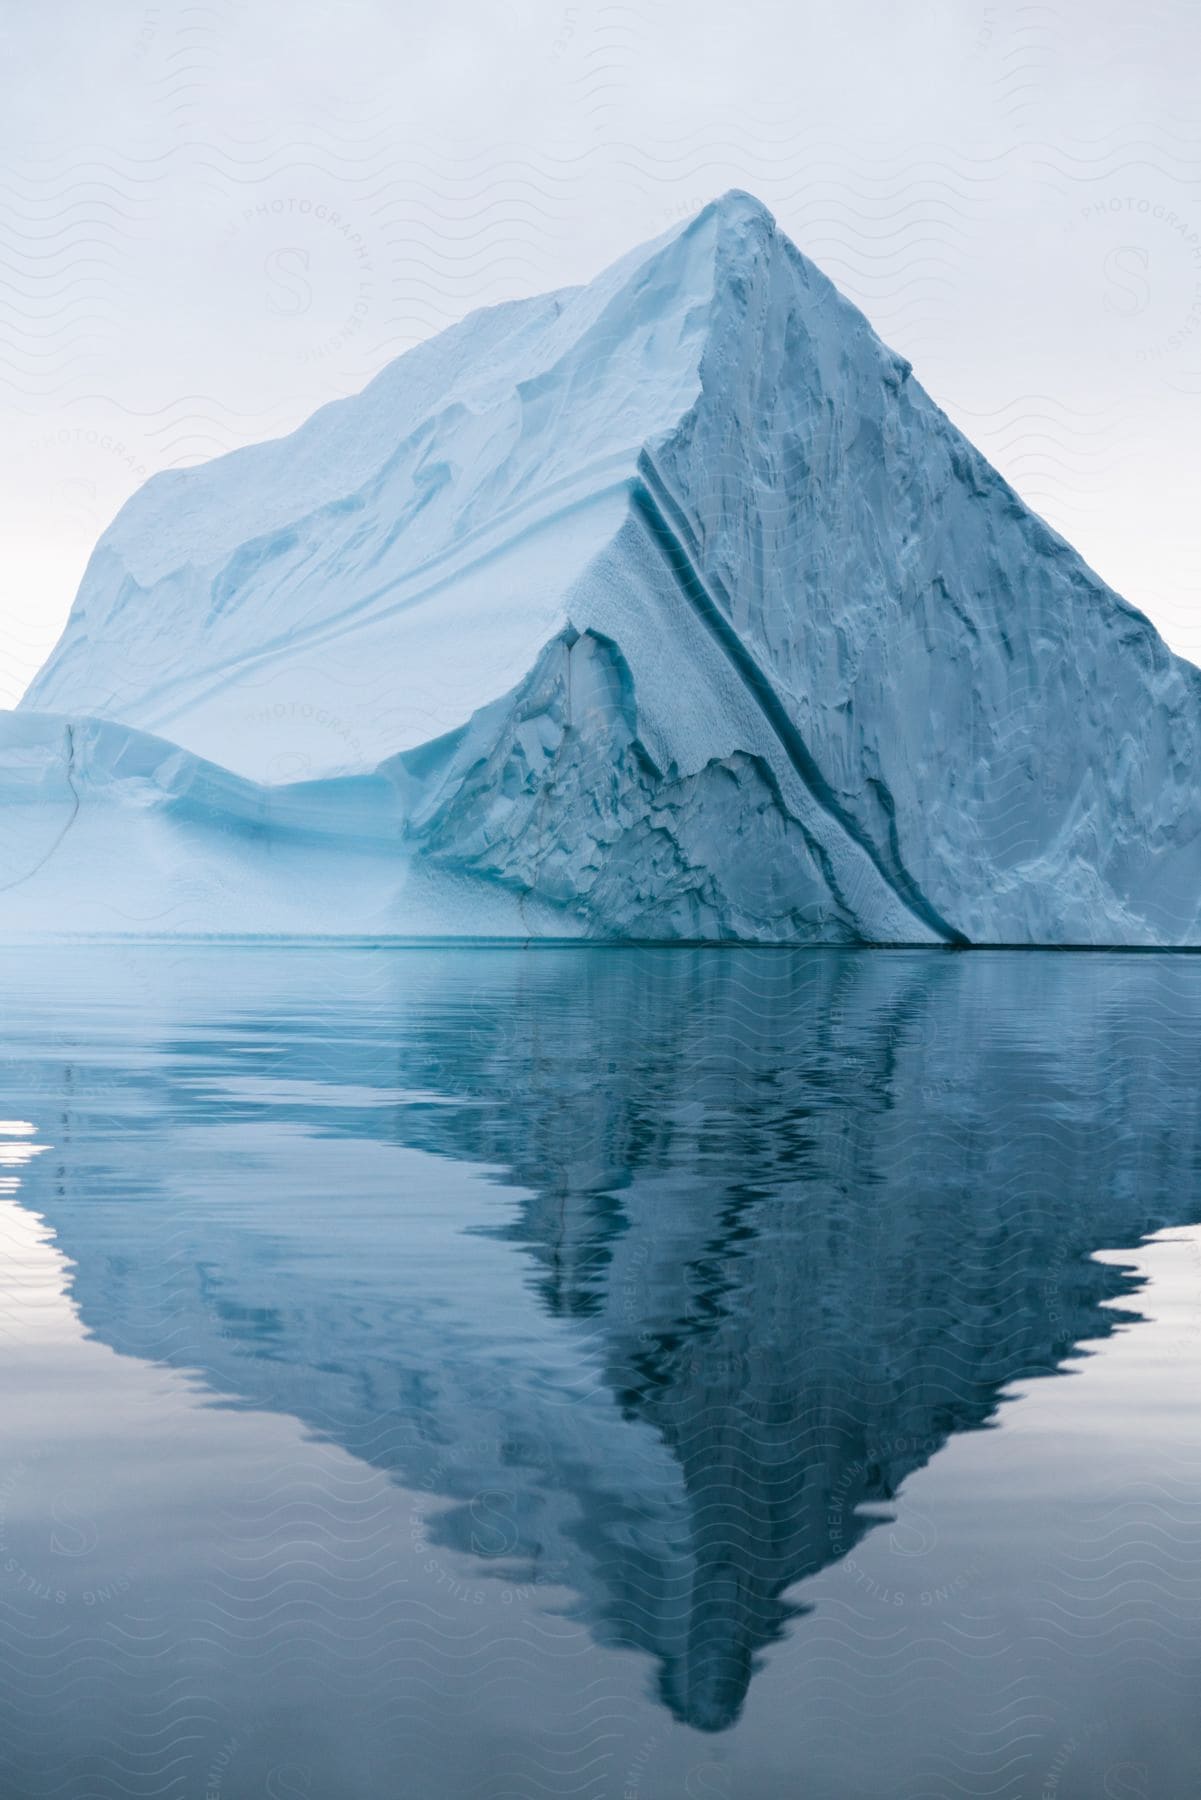 A massive and angular iceberg is surrounded by placid ocean water.